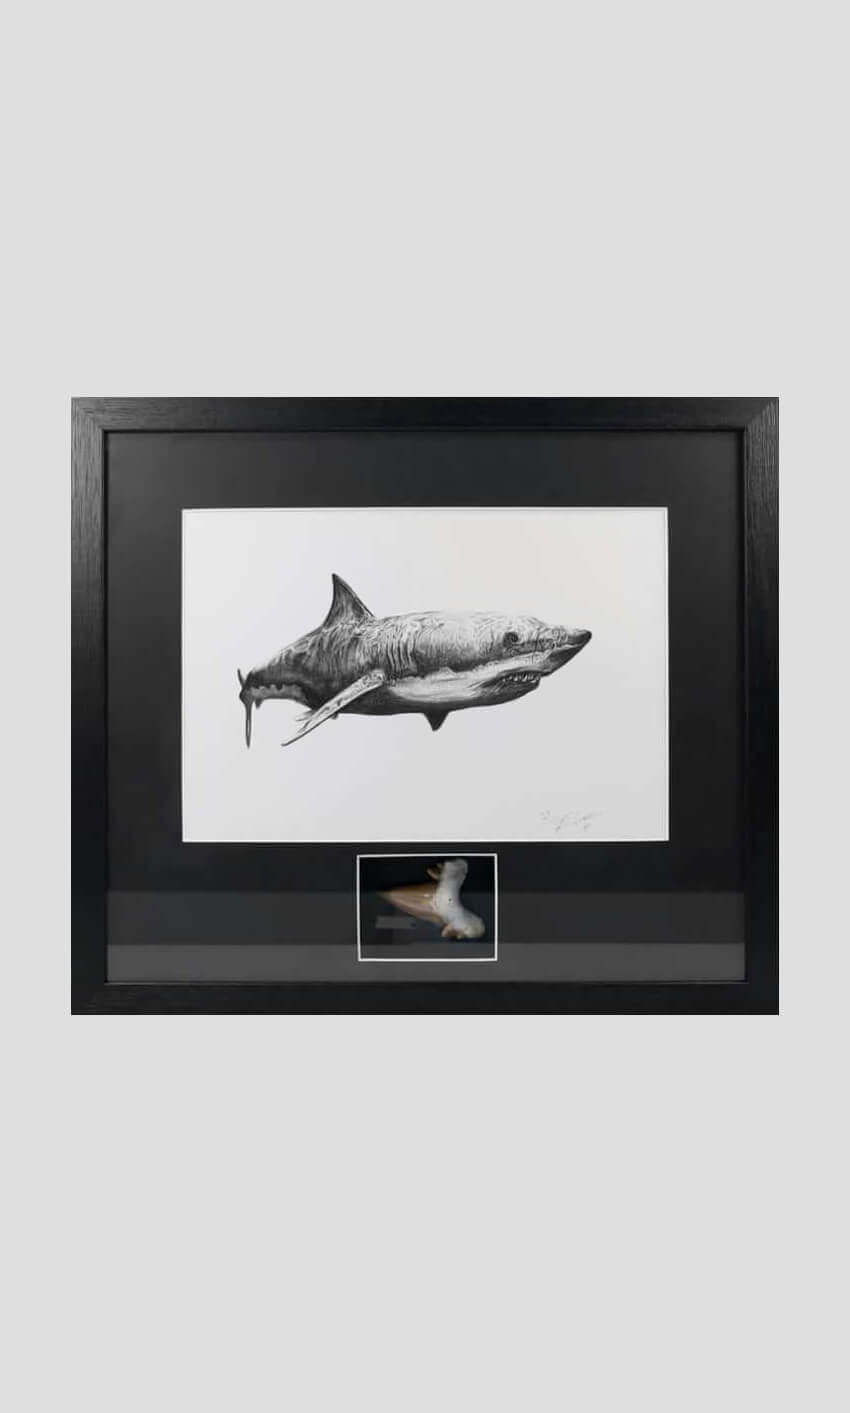 Otoduc obliquus shark tooth for sale in a black frame